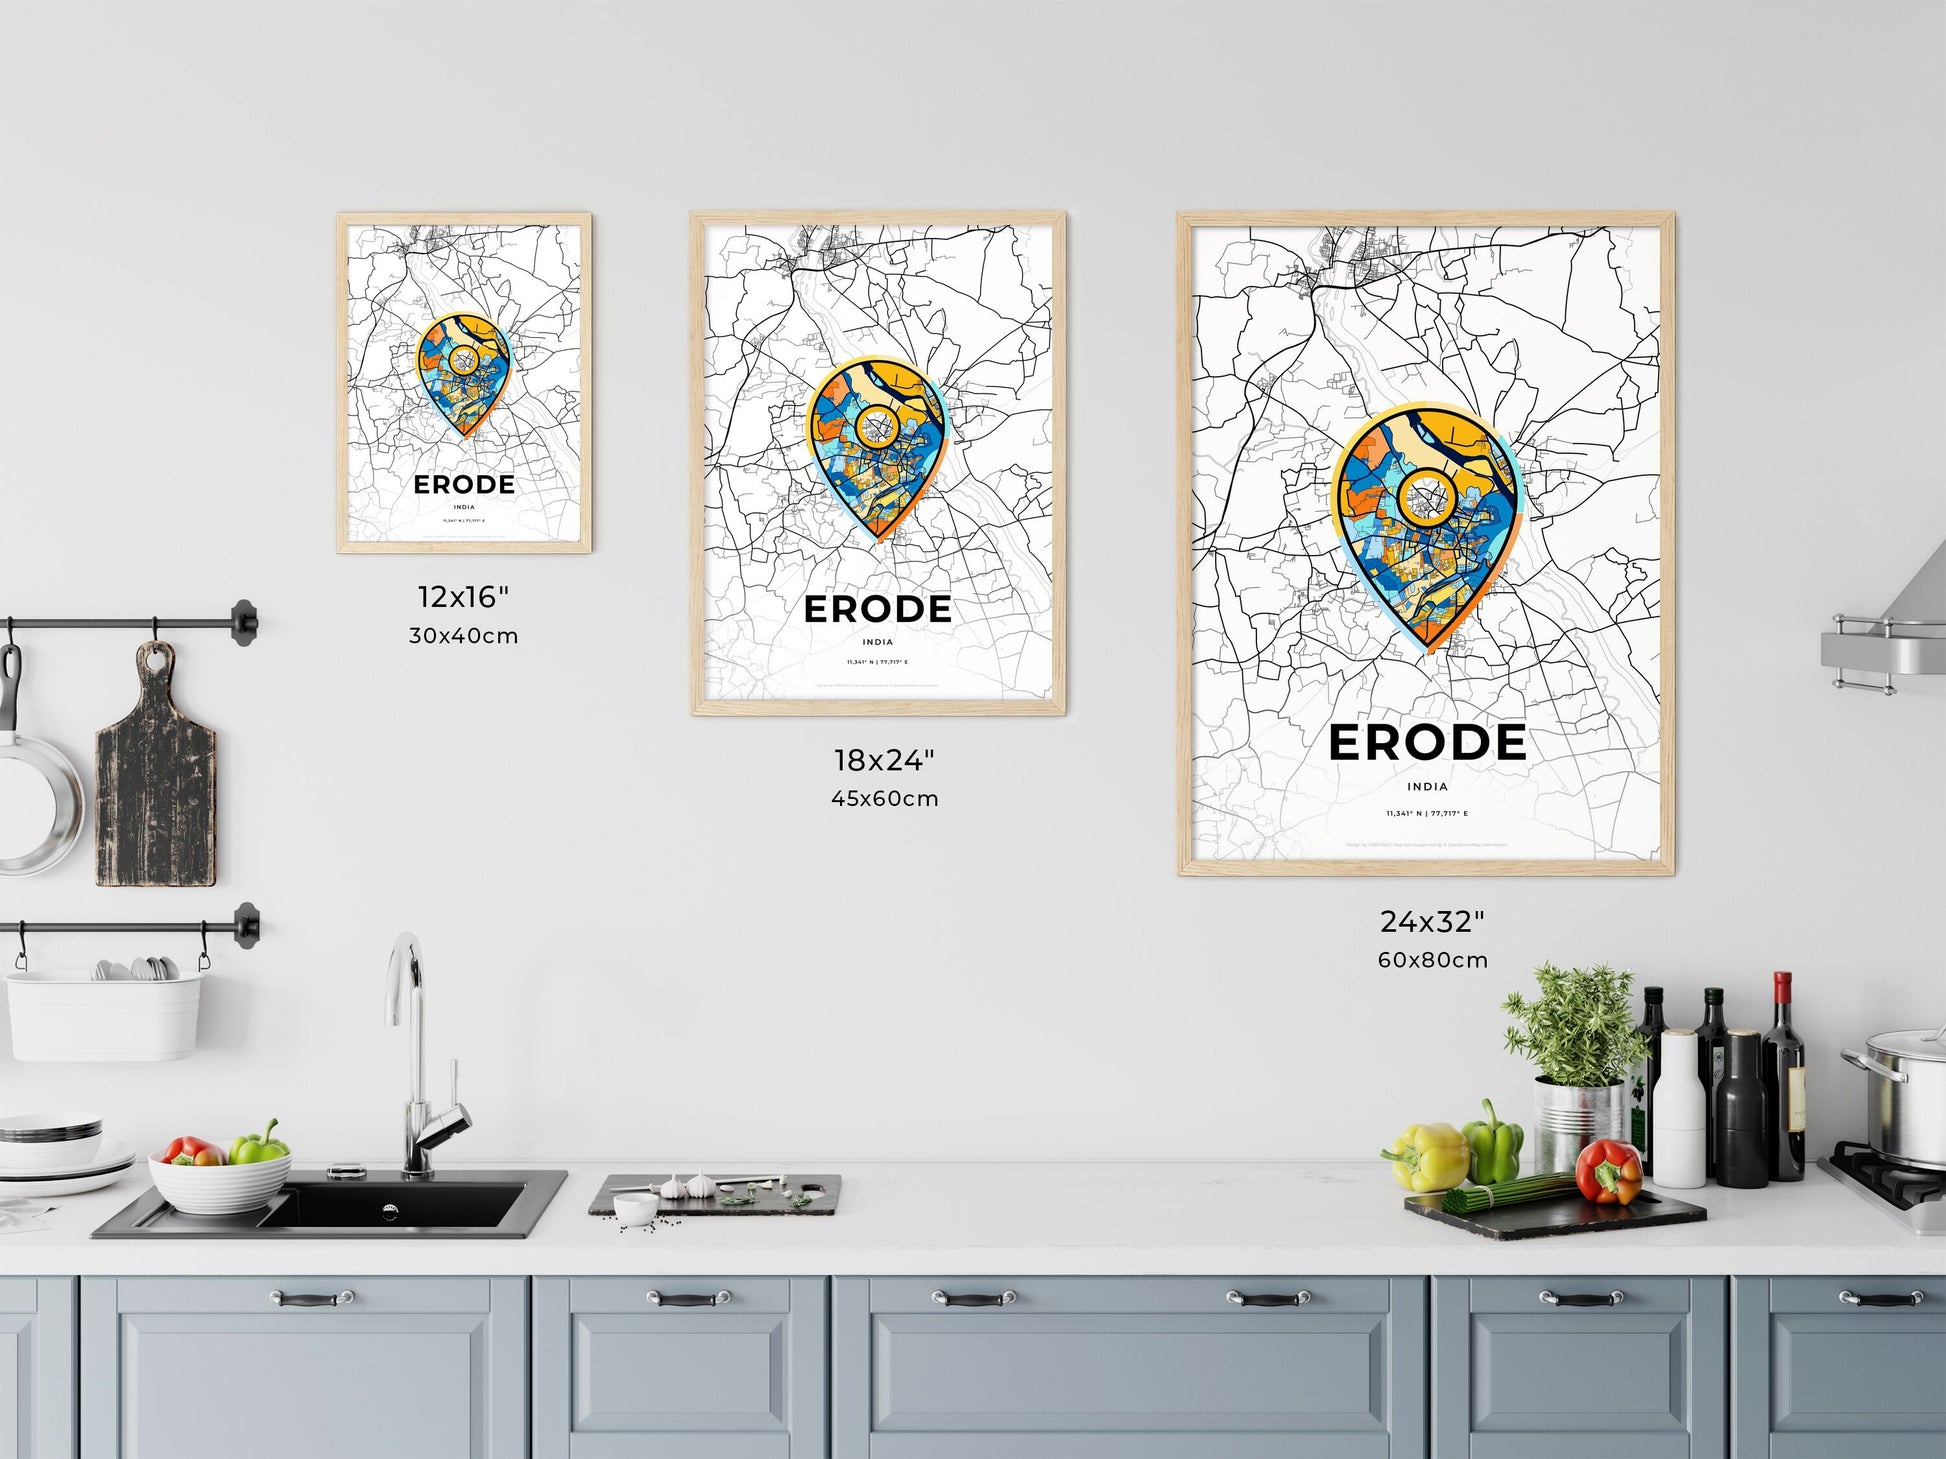 ERODE INDIA minimal art map with a colorful icon. Where it all began, Couple map gift.